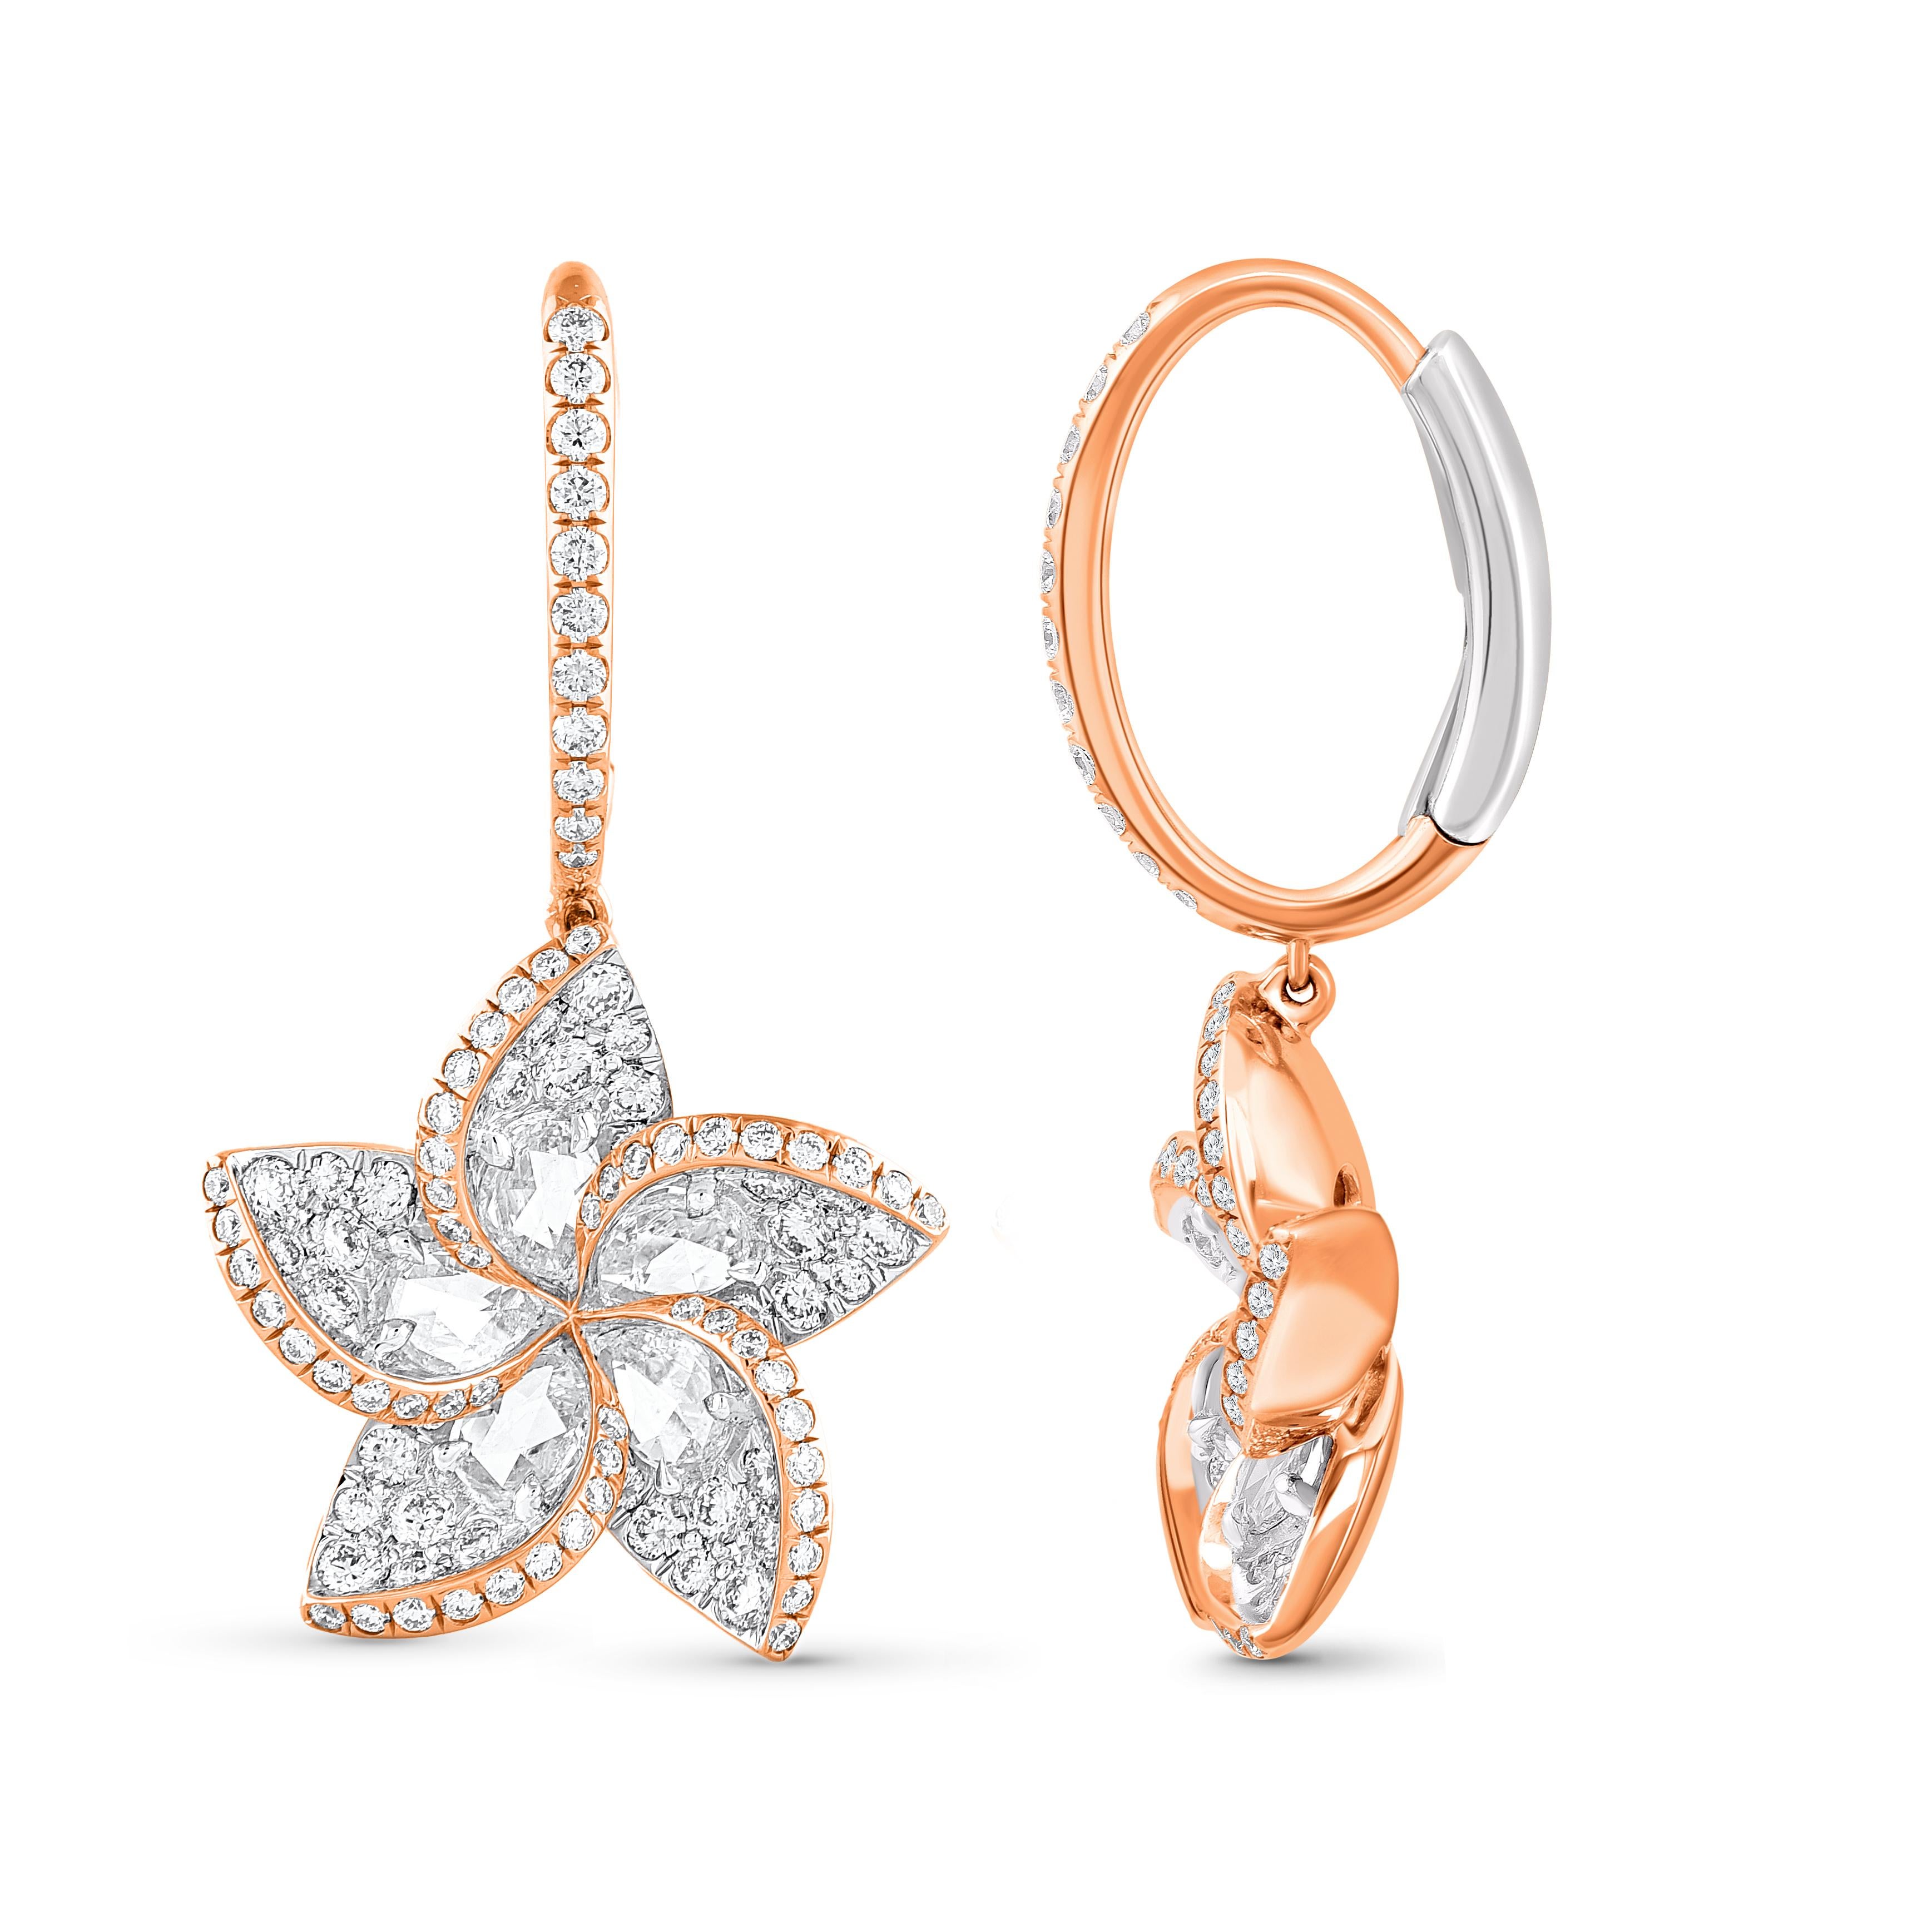 A brilliant cluster of diamonds comes together in these beautiful dangle earrings. The diamonds are graded as F color and VS2 clarity. The total diamond weight of the earrings is 1 5/8 CT and these earrings are meticulously crafted in 18 KT rose